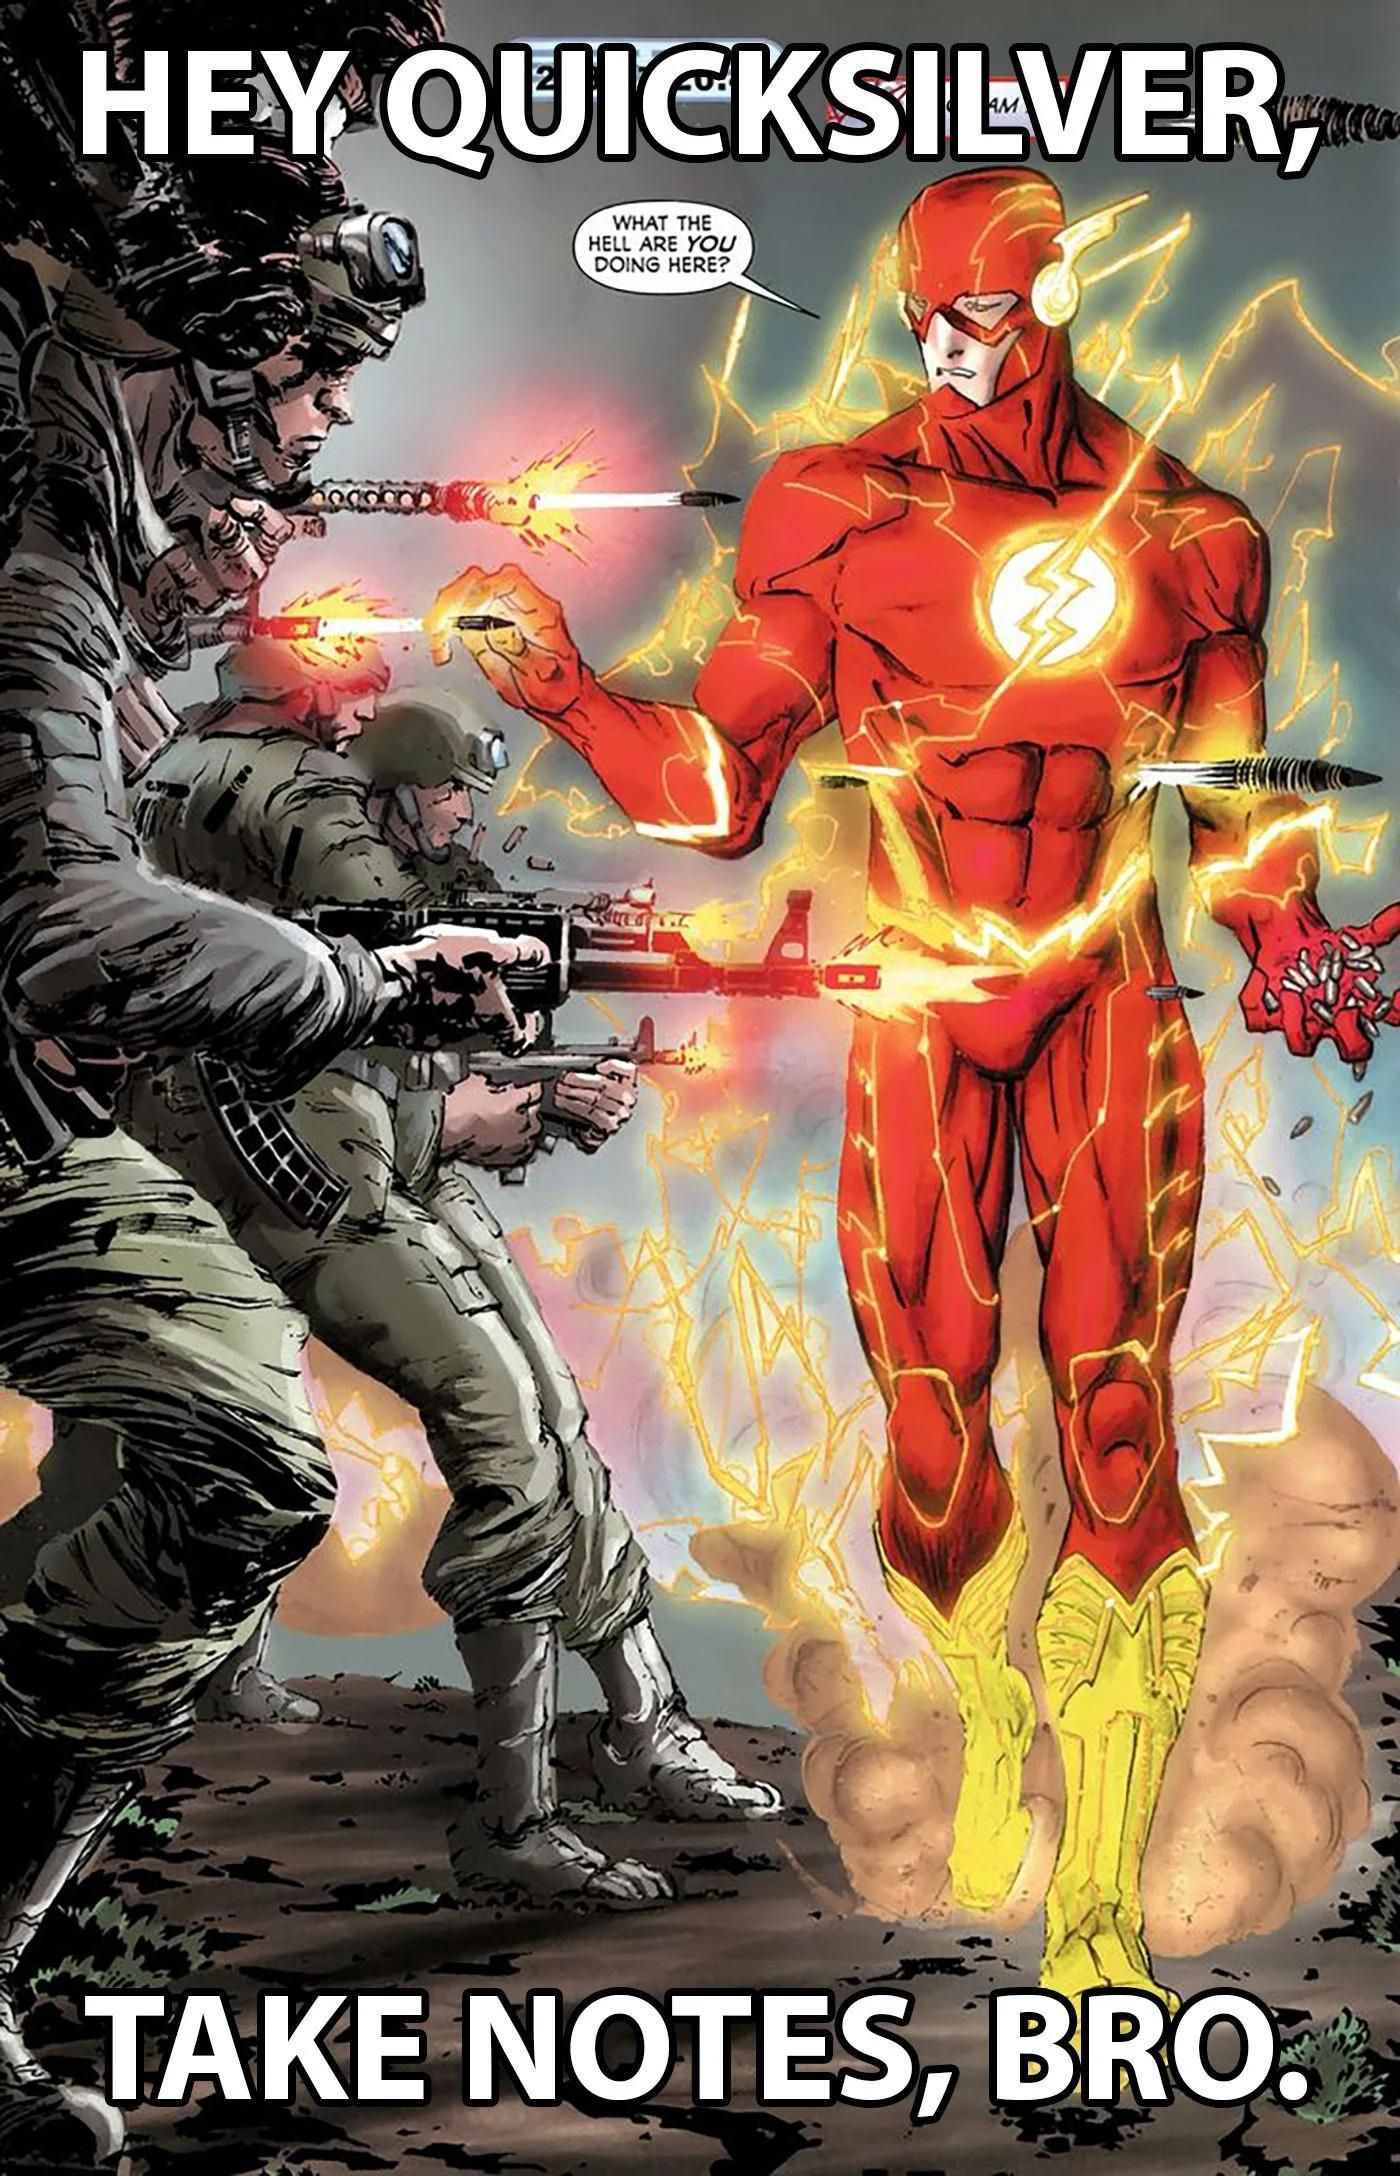 A meme featuring The Flash walking among flying bullets